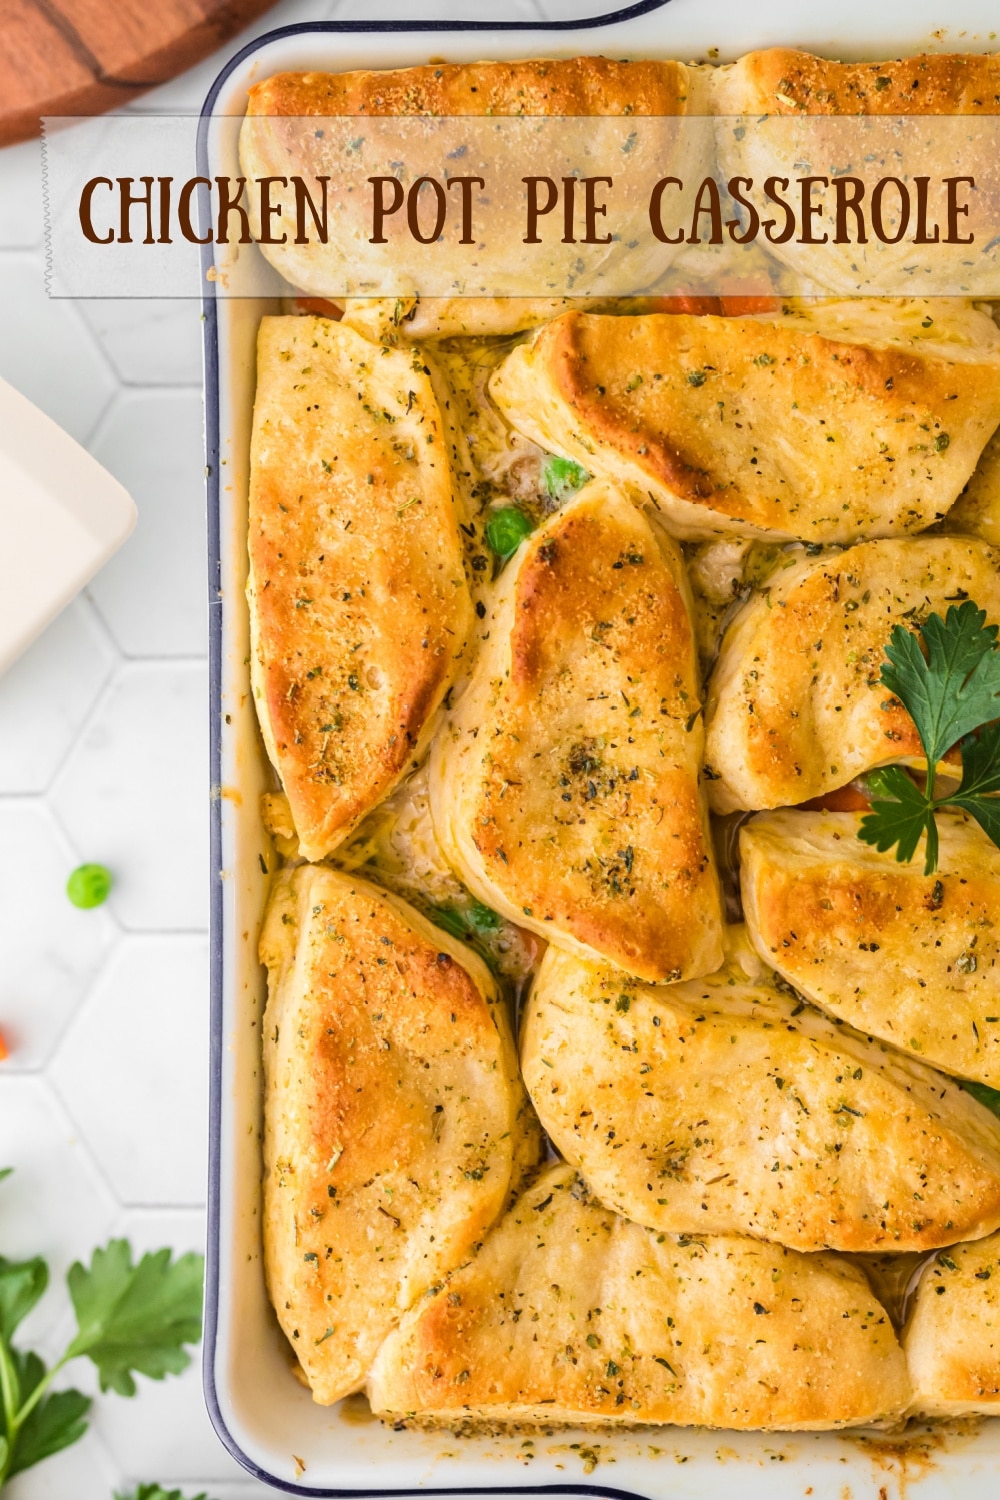 Chicken Pot Pie is never a bad idea, regardless of the vessel it's cooked in. This casserole version has some weeknight-friendly ingredients that allow you to get dinner on the table in a reasonable amount of time. via @cmpollak1